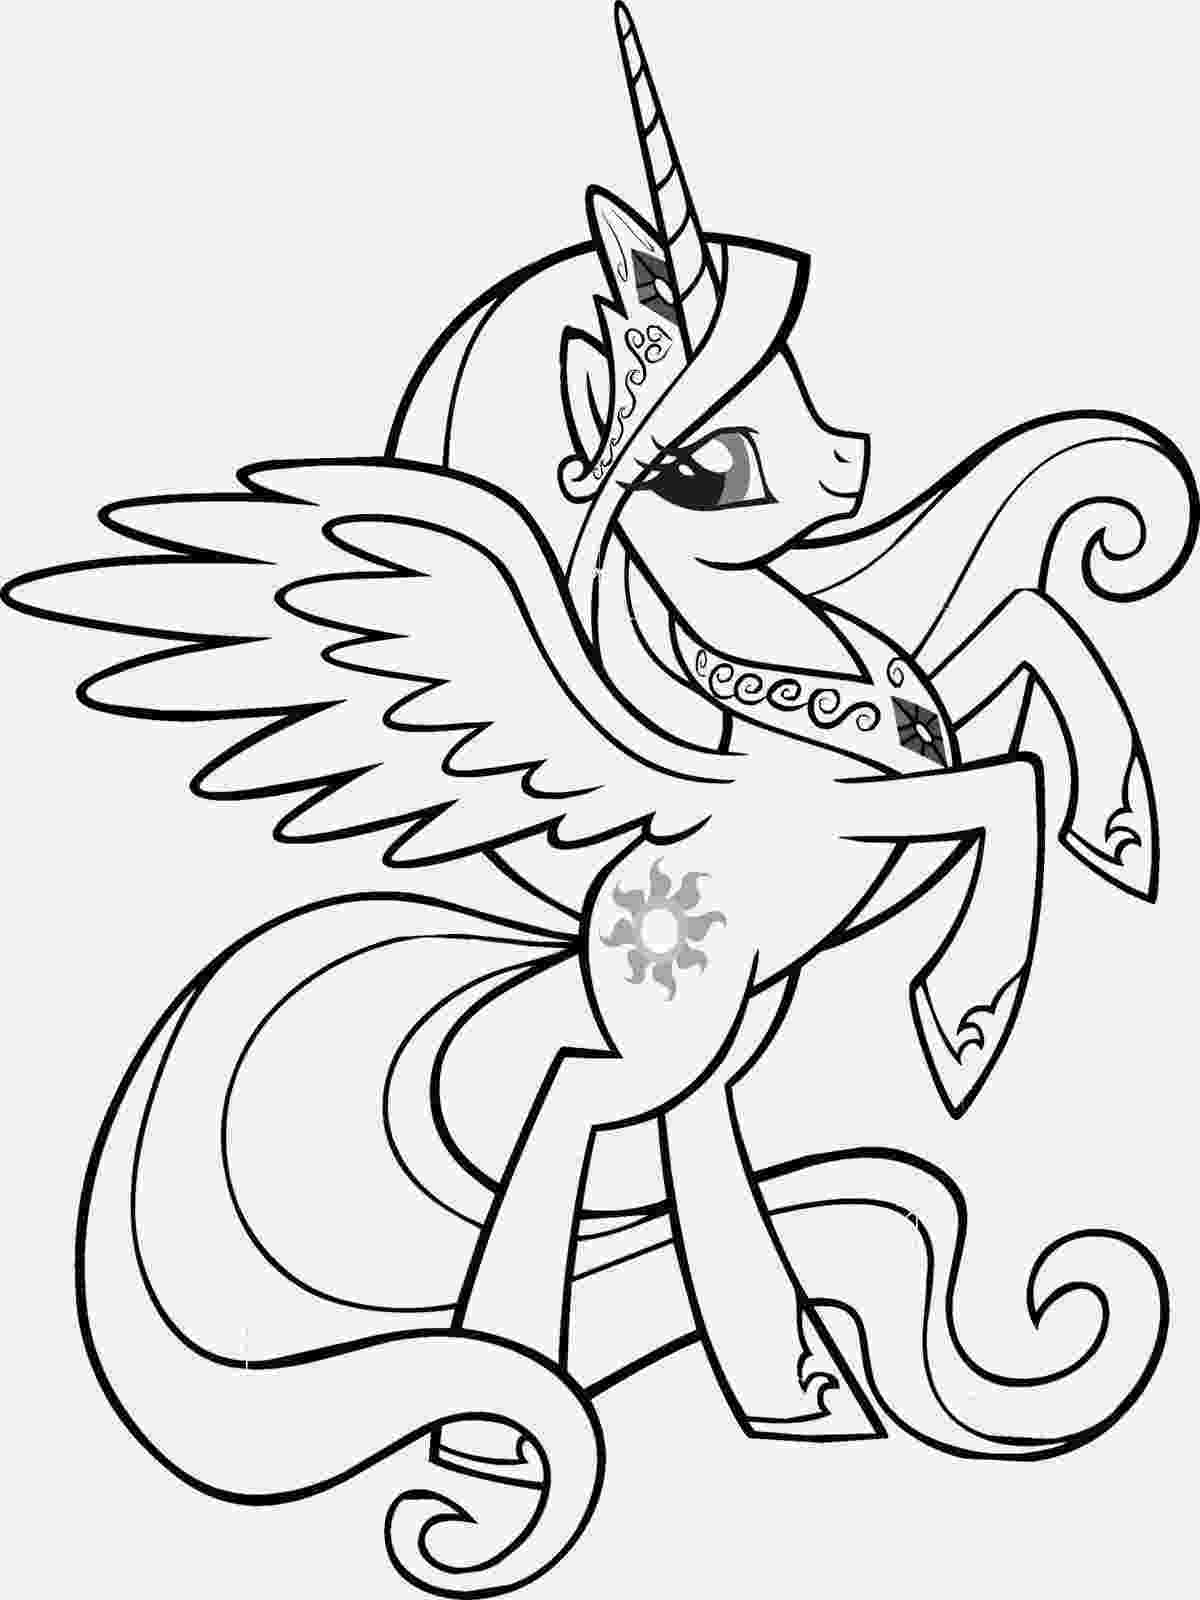 my little pony pages to color my little pony coloring pages squid army color pony my pages to little 